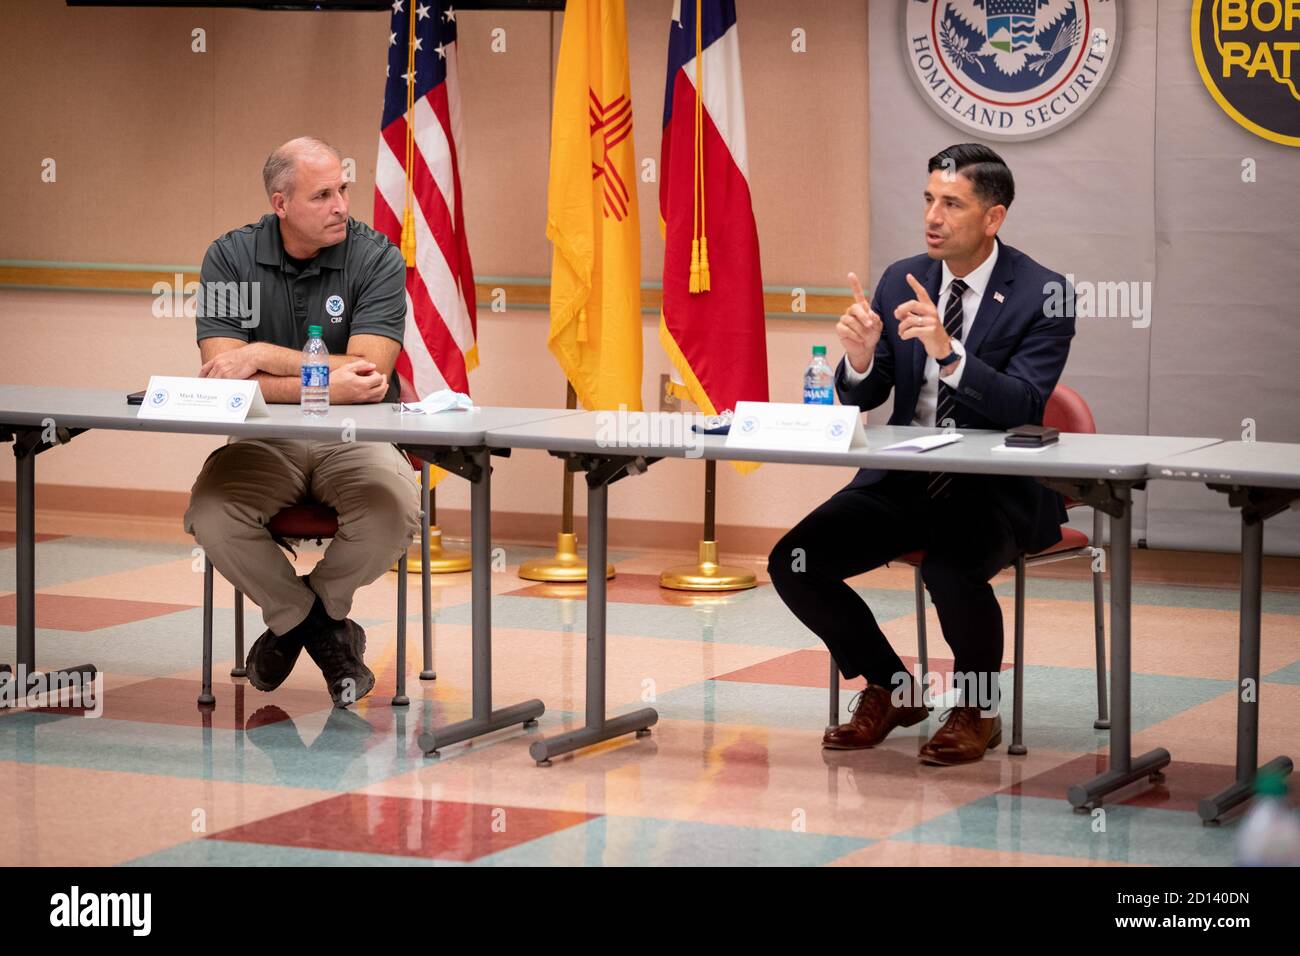 U.S. Customs and Border Protection Acting Commissioner Mark Morgan and Acting Department of Homeland Security Secretary Chad Wolf meet with local DHS and CBP leadership during a visit to the Santa Teresa Port of Entry in Santa Teresa, New Mexico, August 26, 2020. CBP Stock Photo